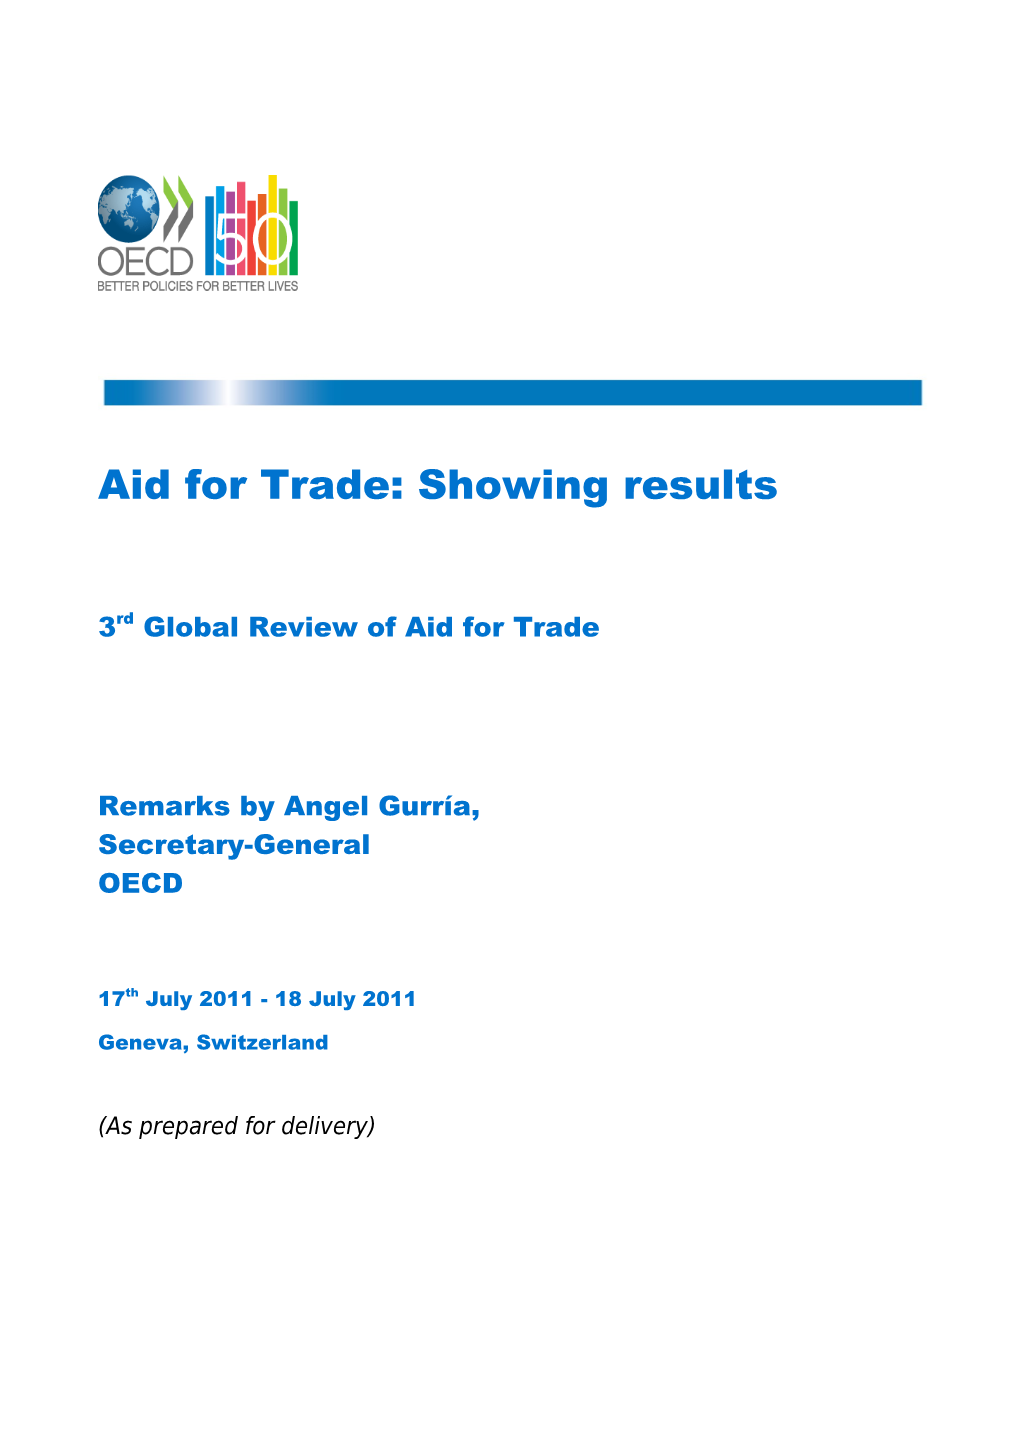 Aid for Trade: Showing Results